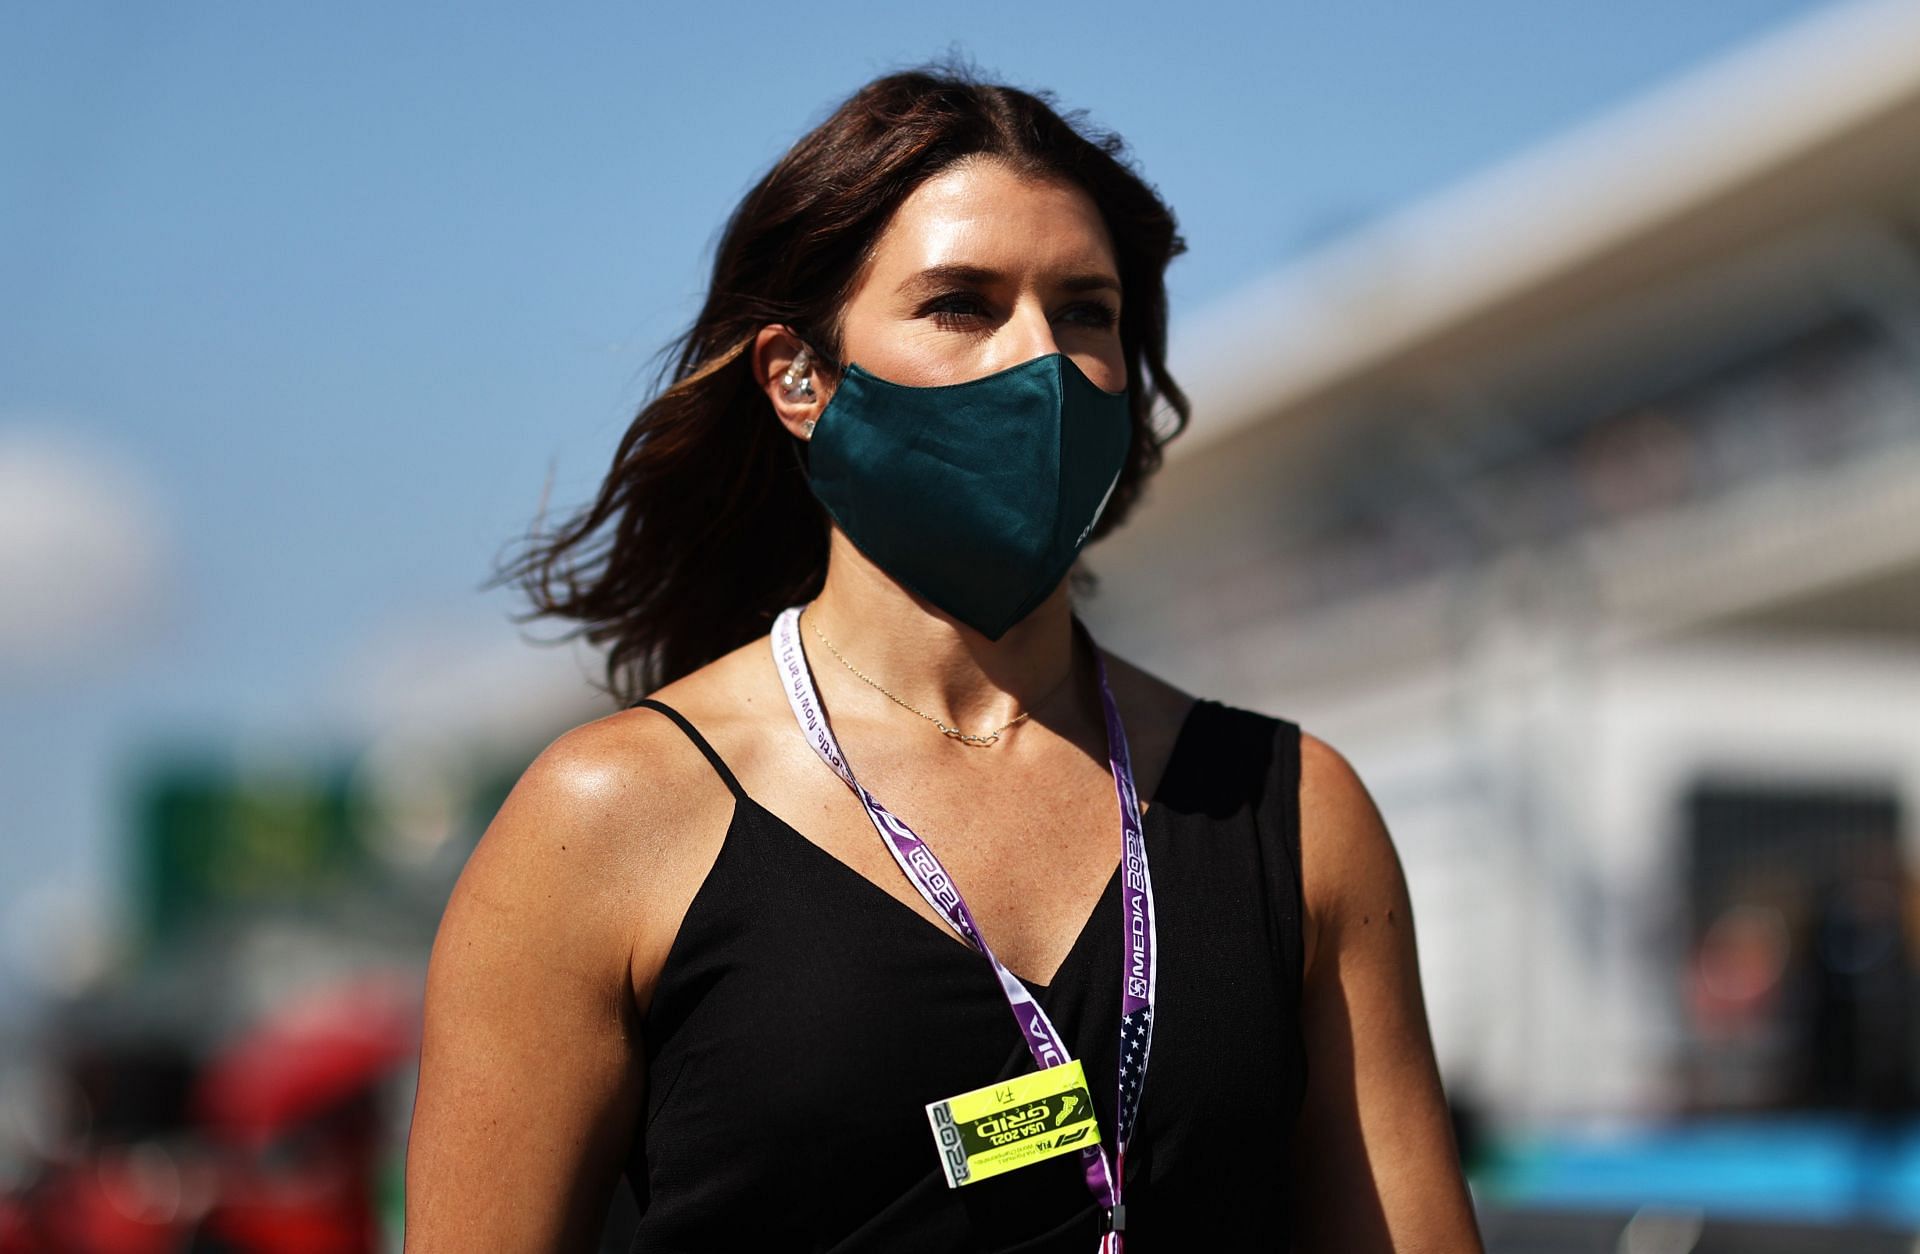 Danica Patrick looks on in the Paddock before the F1 Grand Prix of USA at Circuit of The Americas